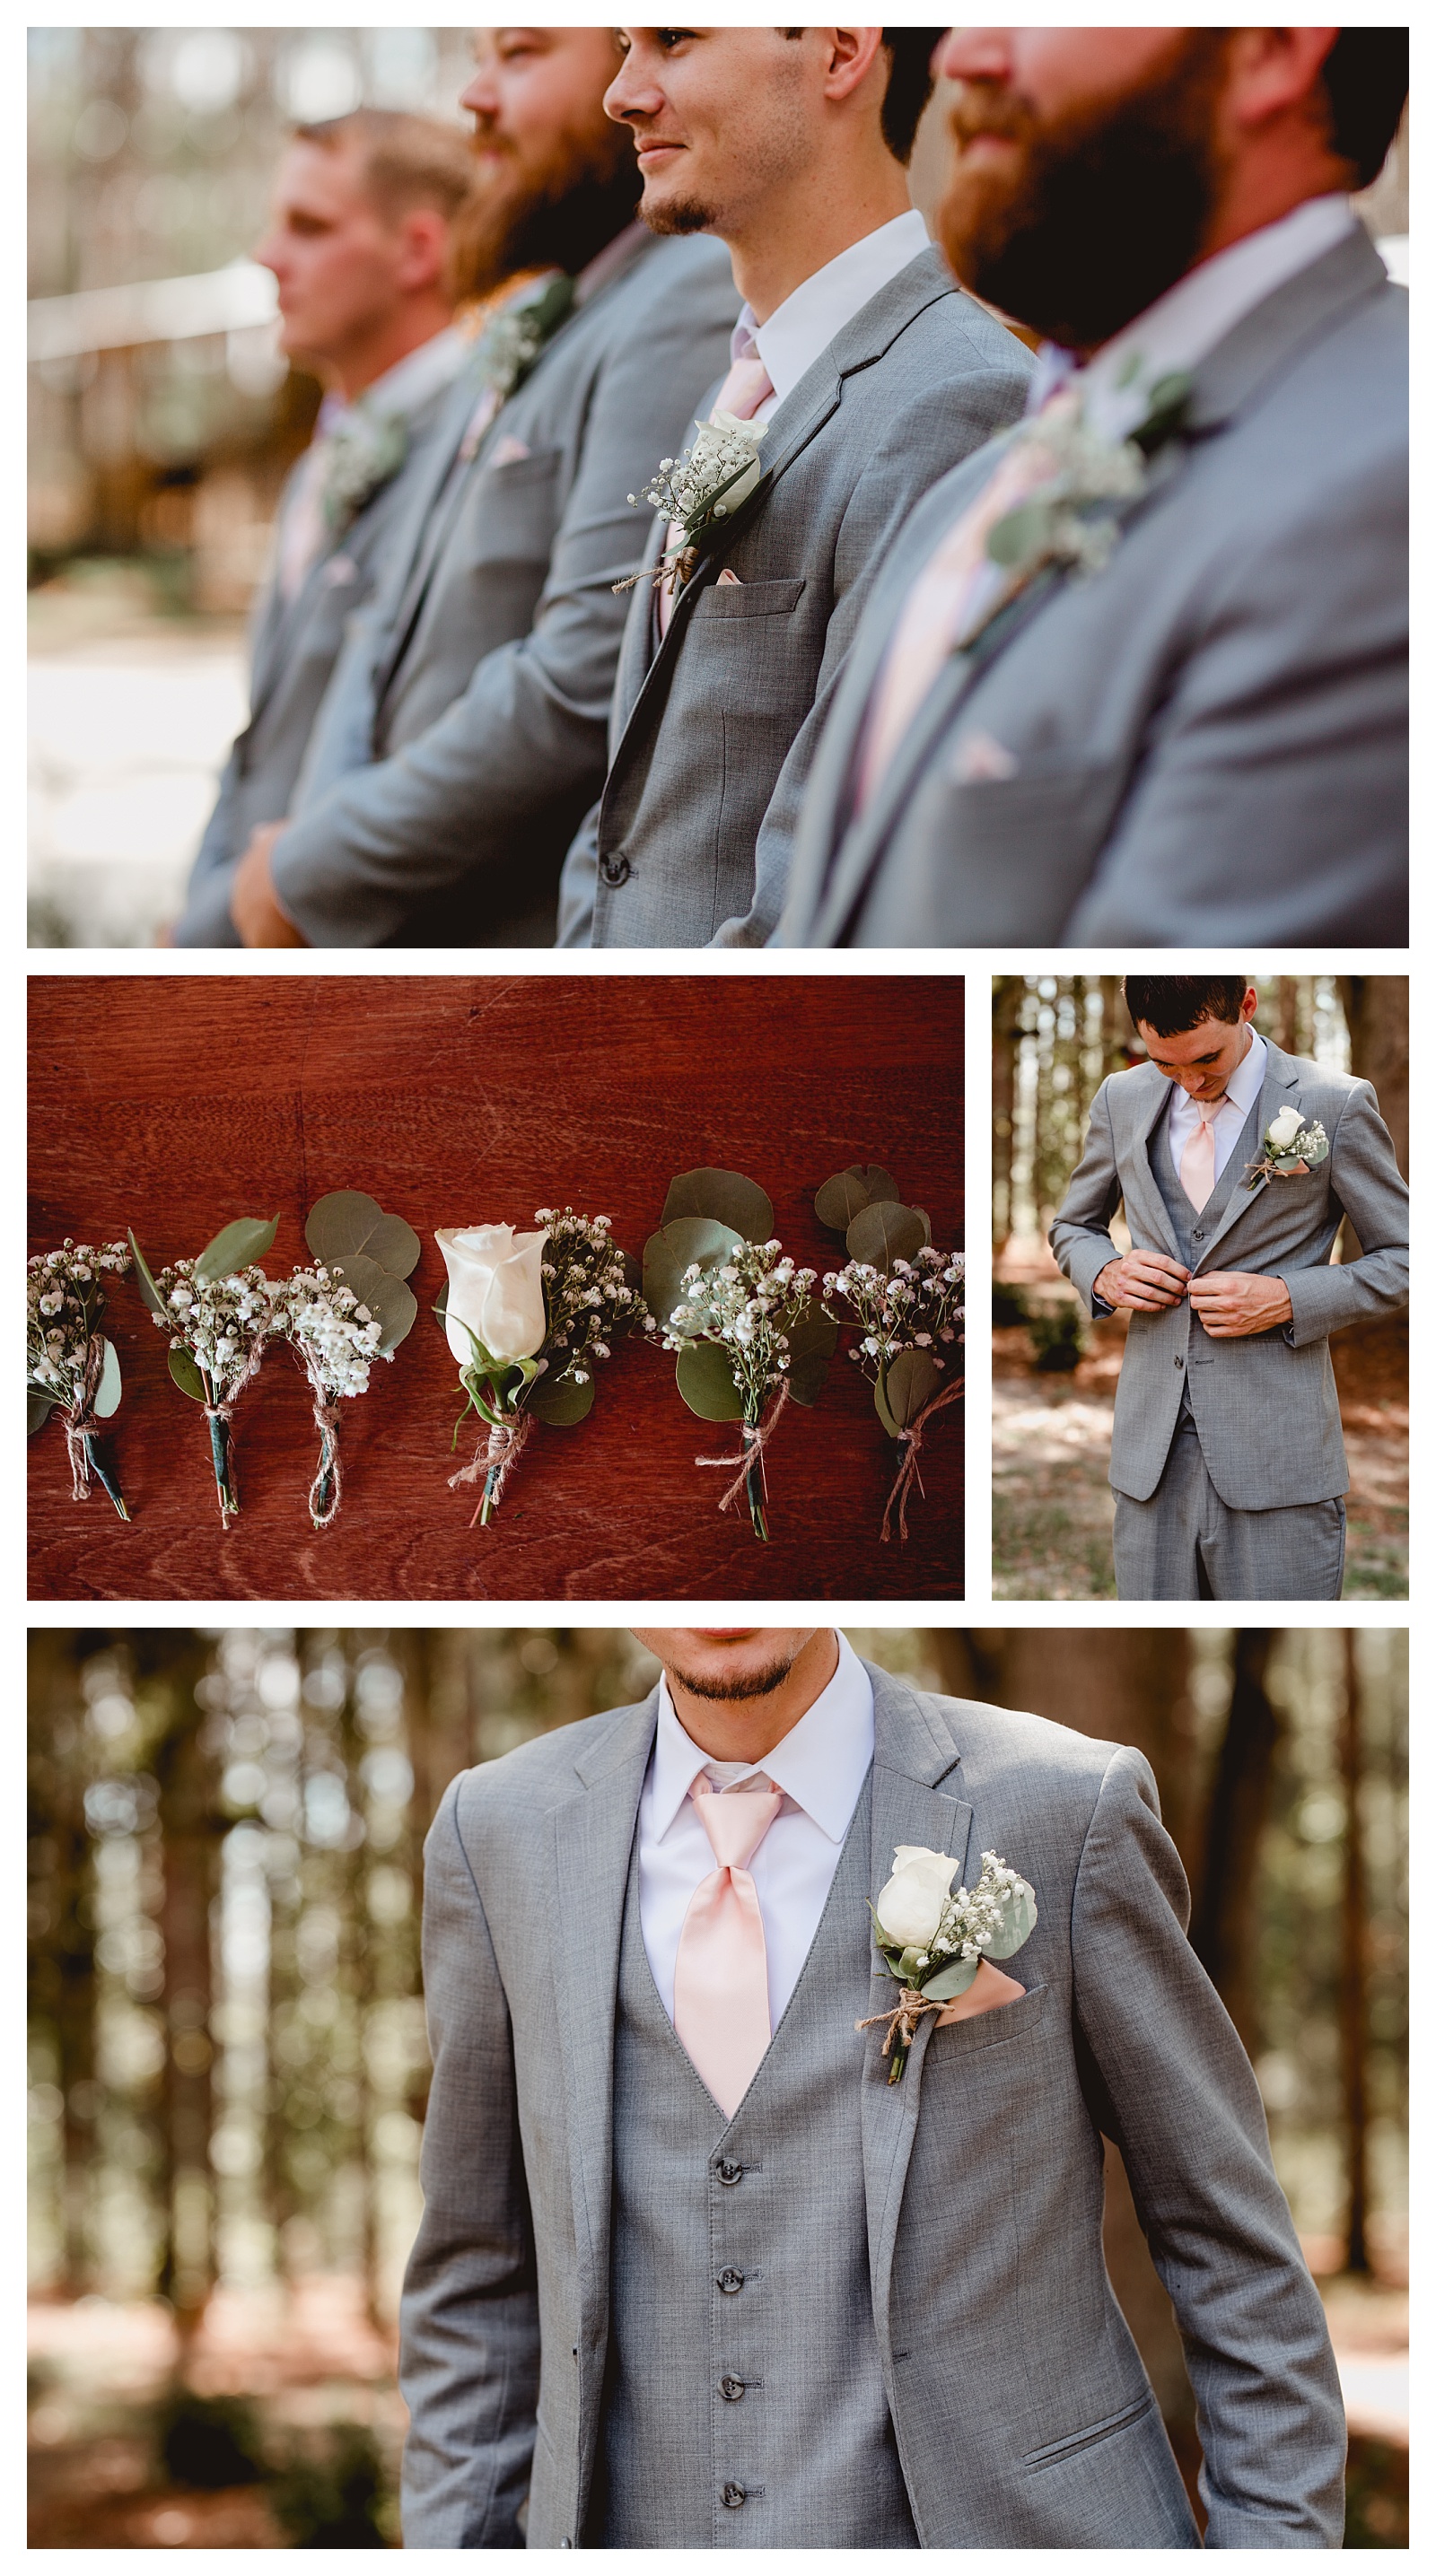 Groom detail photos on his wedding day, Tallahassee wedding photographer. Shelly Williams Photography